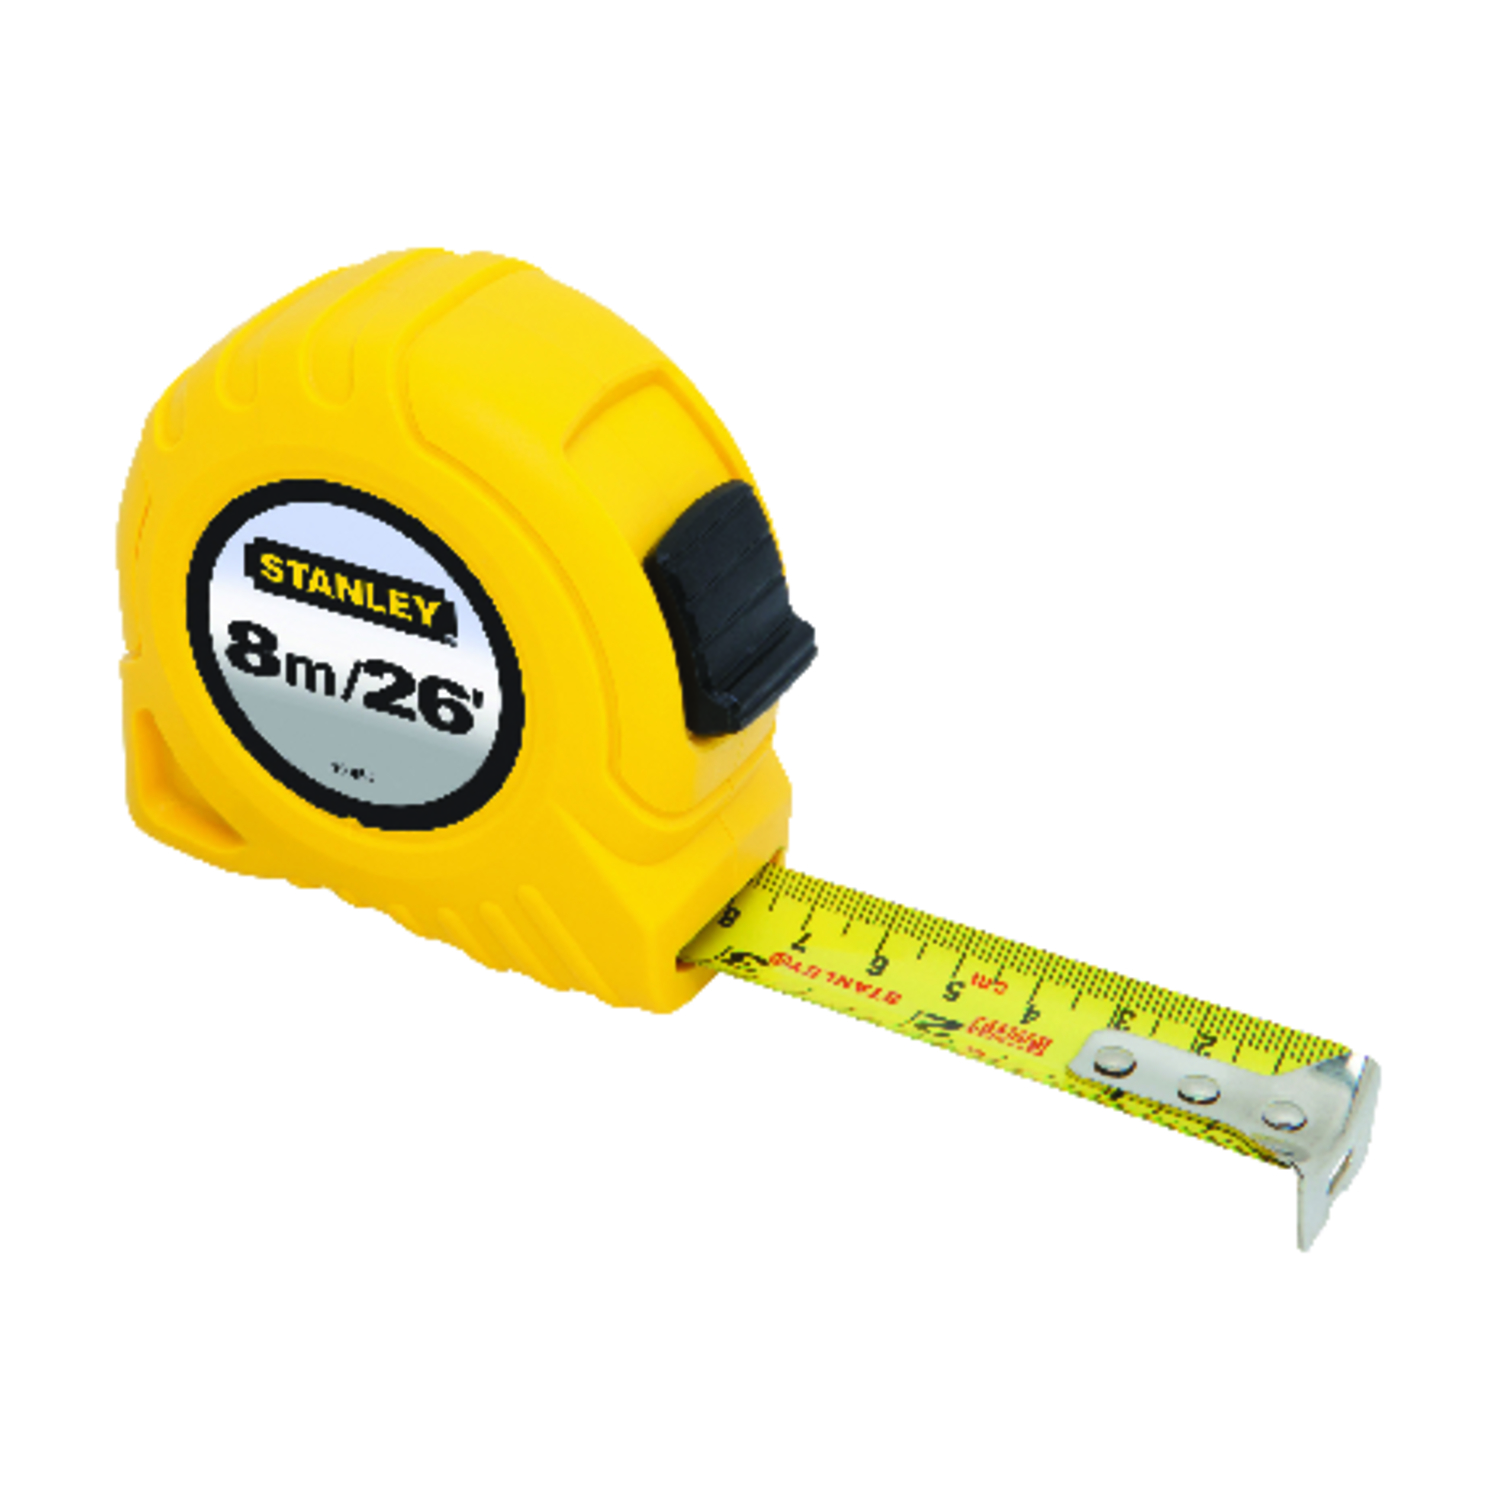 Photos - Tape Measure and Surveyor Tape Stanley 26 ft. L X 1 in. W Tape Measure 1 pk 30-456 